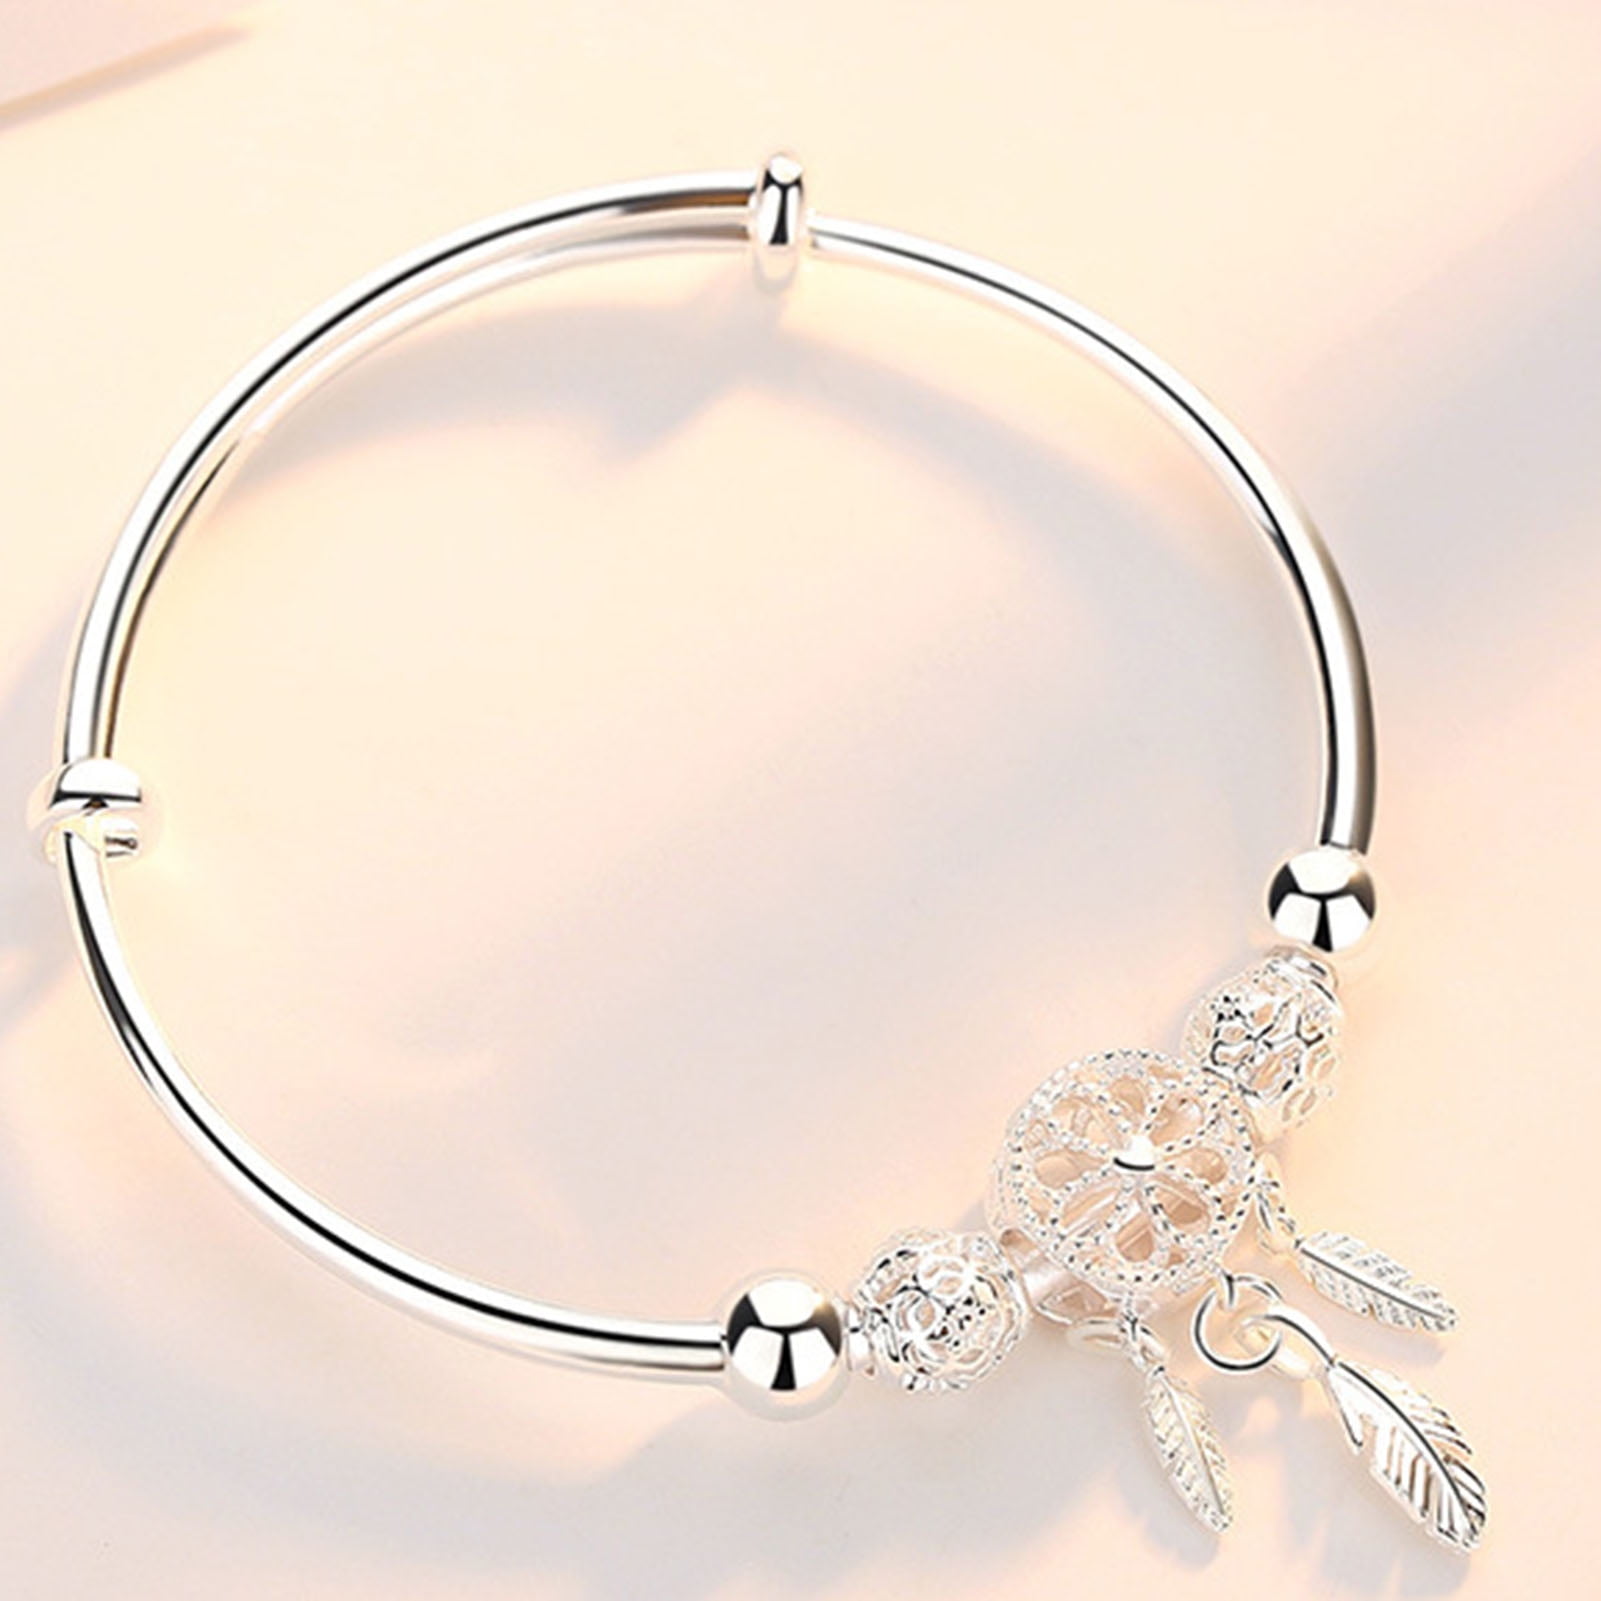 Womens Silver Hollow Leaves Open Bracelet,Fine Sculpture Charm Bangle Jewelry,Gift for Mother Girlfriend 